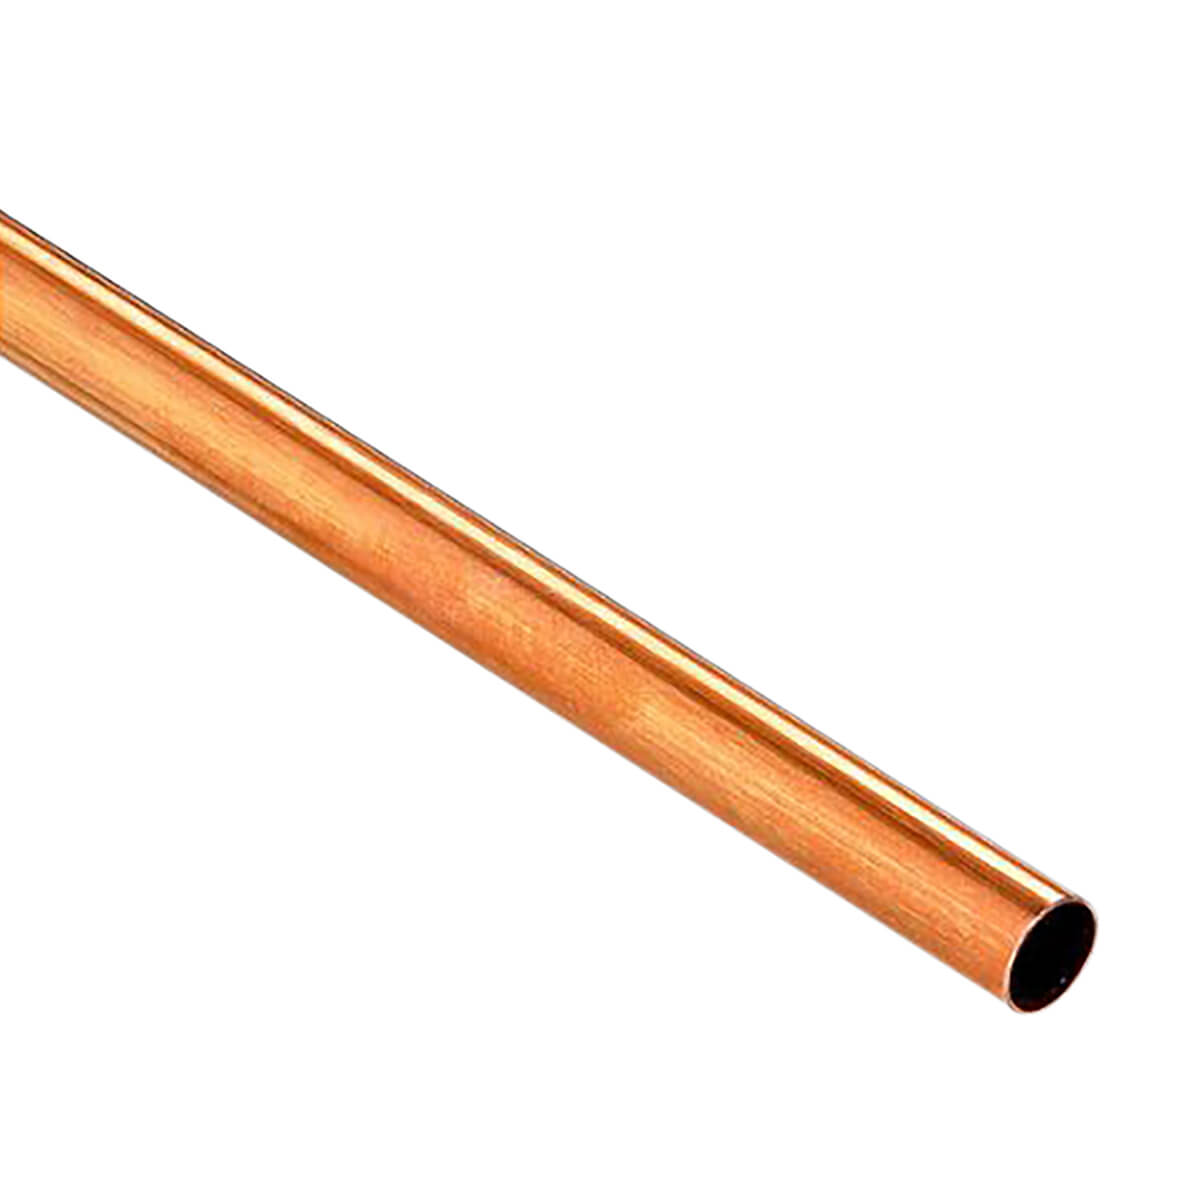 Copper Pipe Type M - 1/2-in x 12-ft